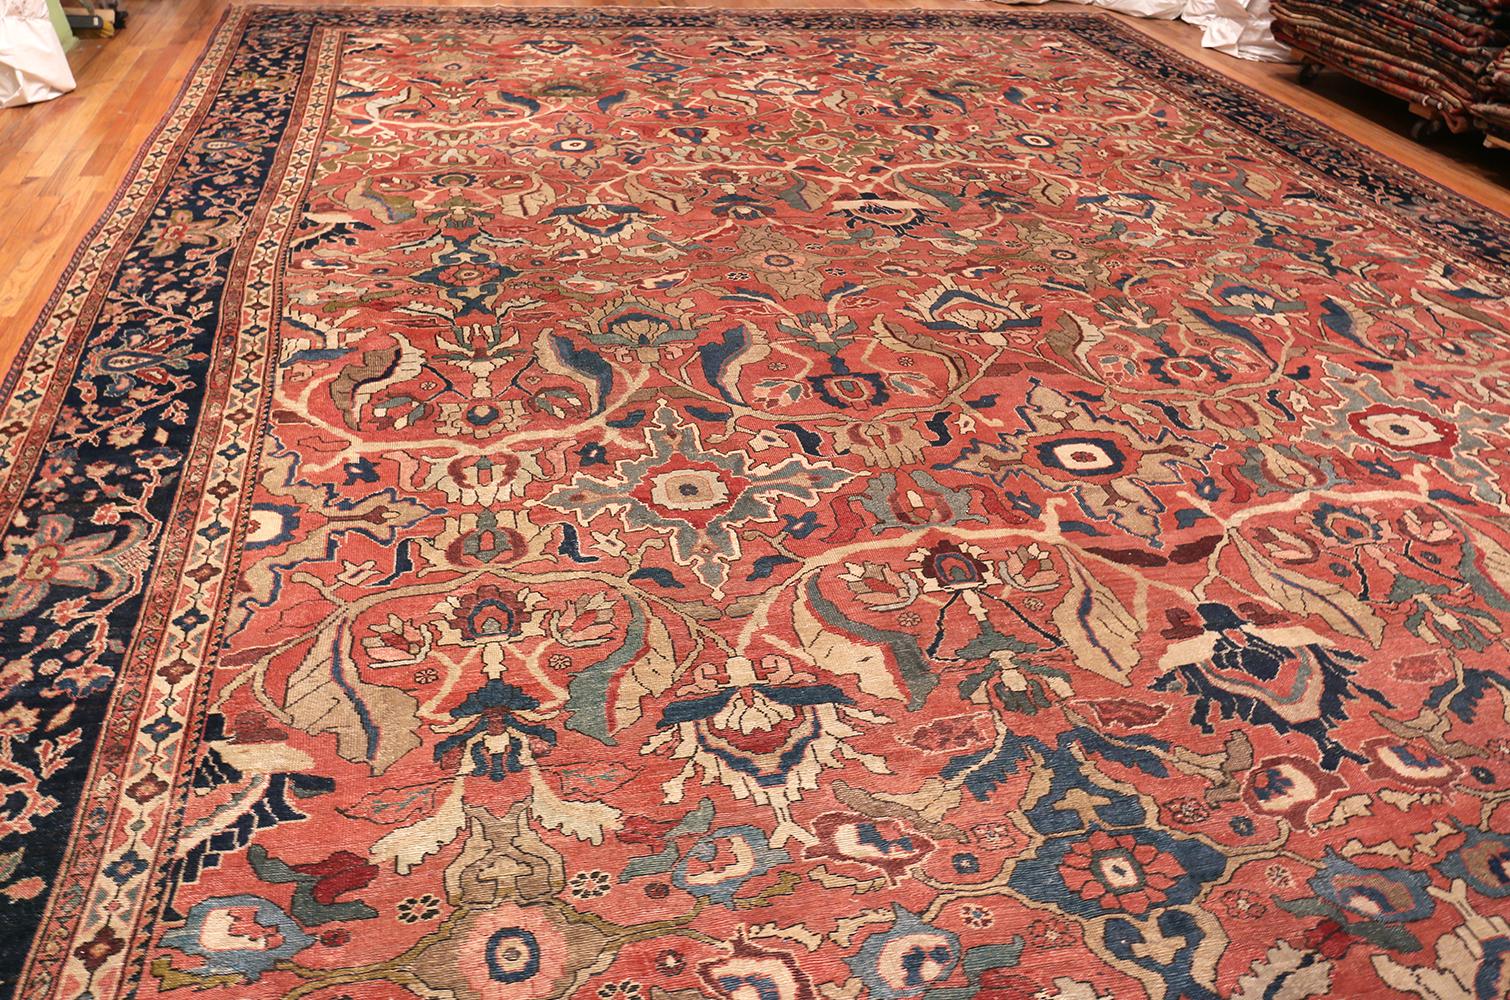 Oversized Antique Persian Sultanabad Rug. Size: 17 ft. 6 in x 31 ft. 2 in 2